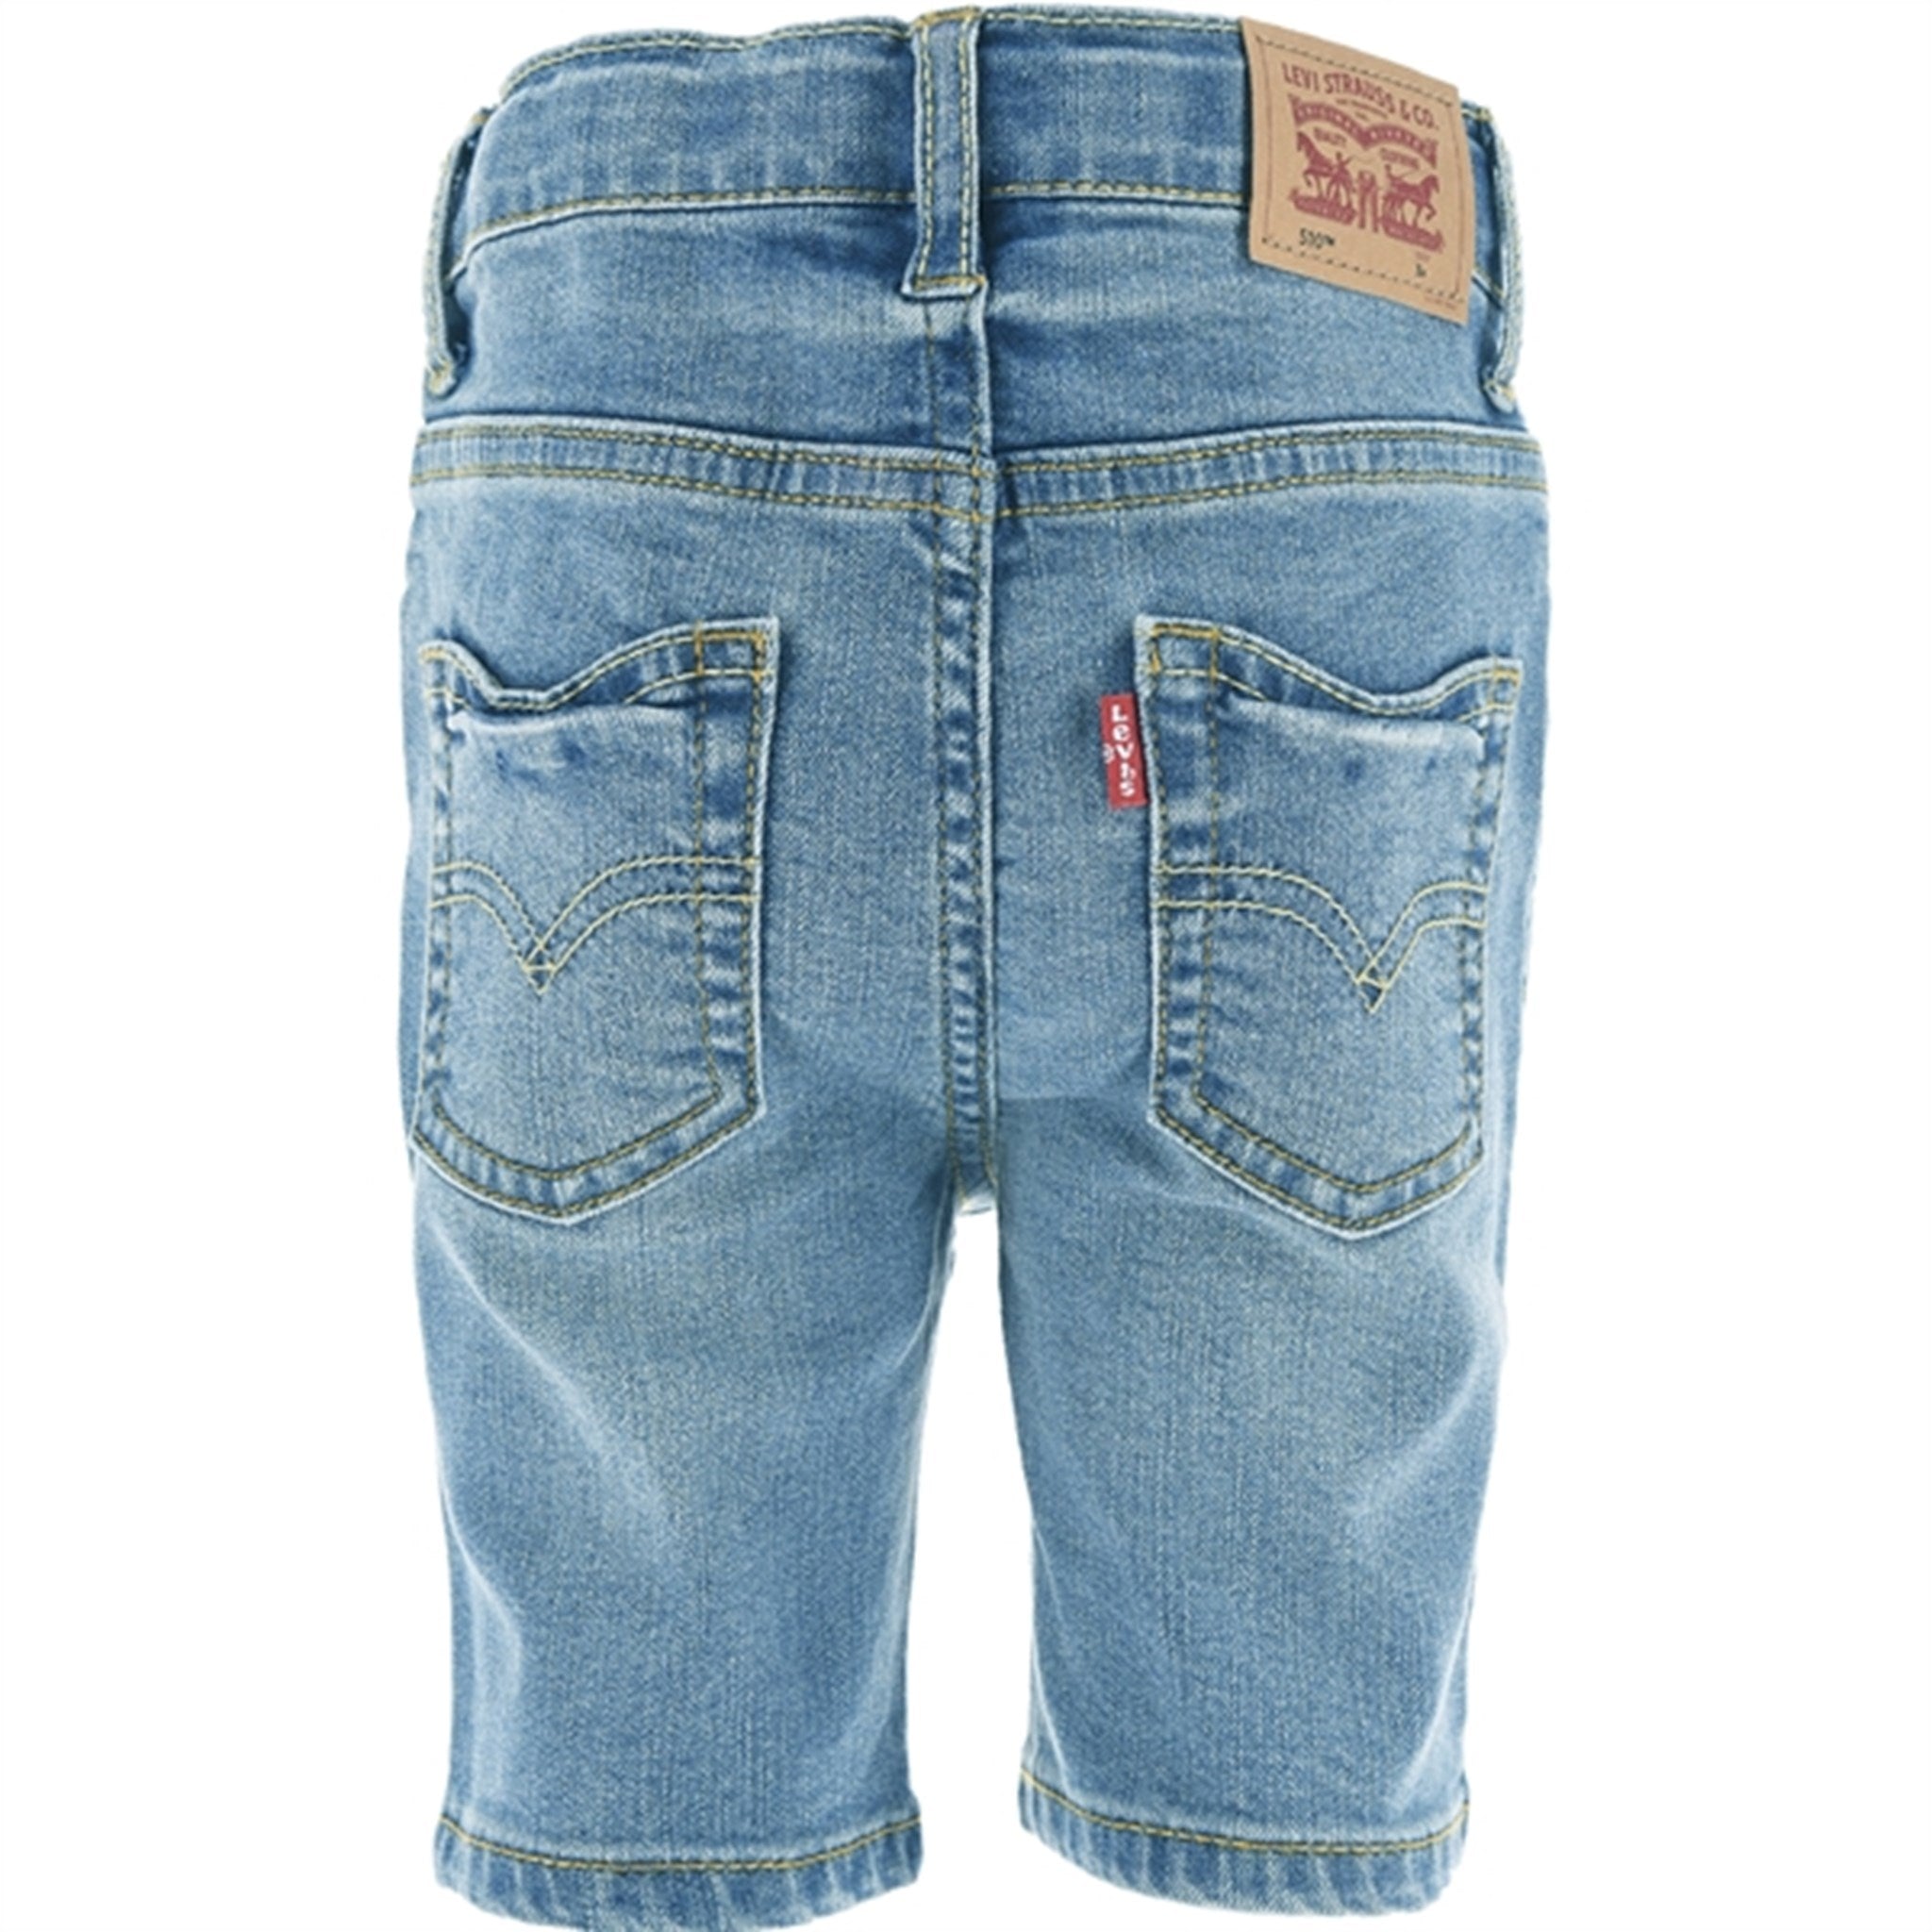 Levi's Shorts 510 Embroidered Hydra